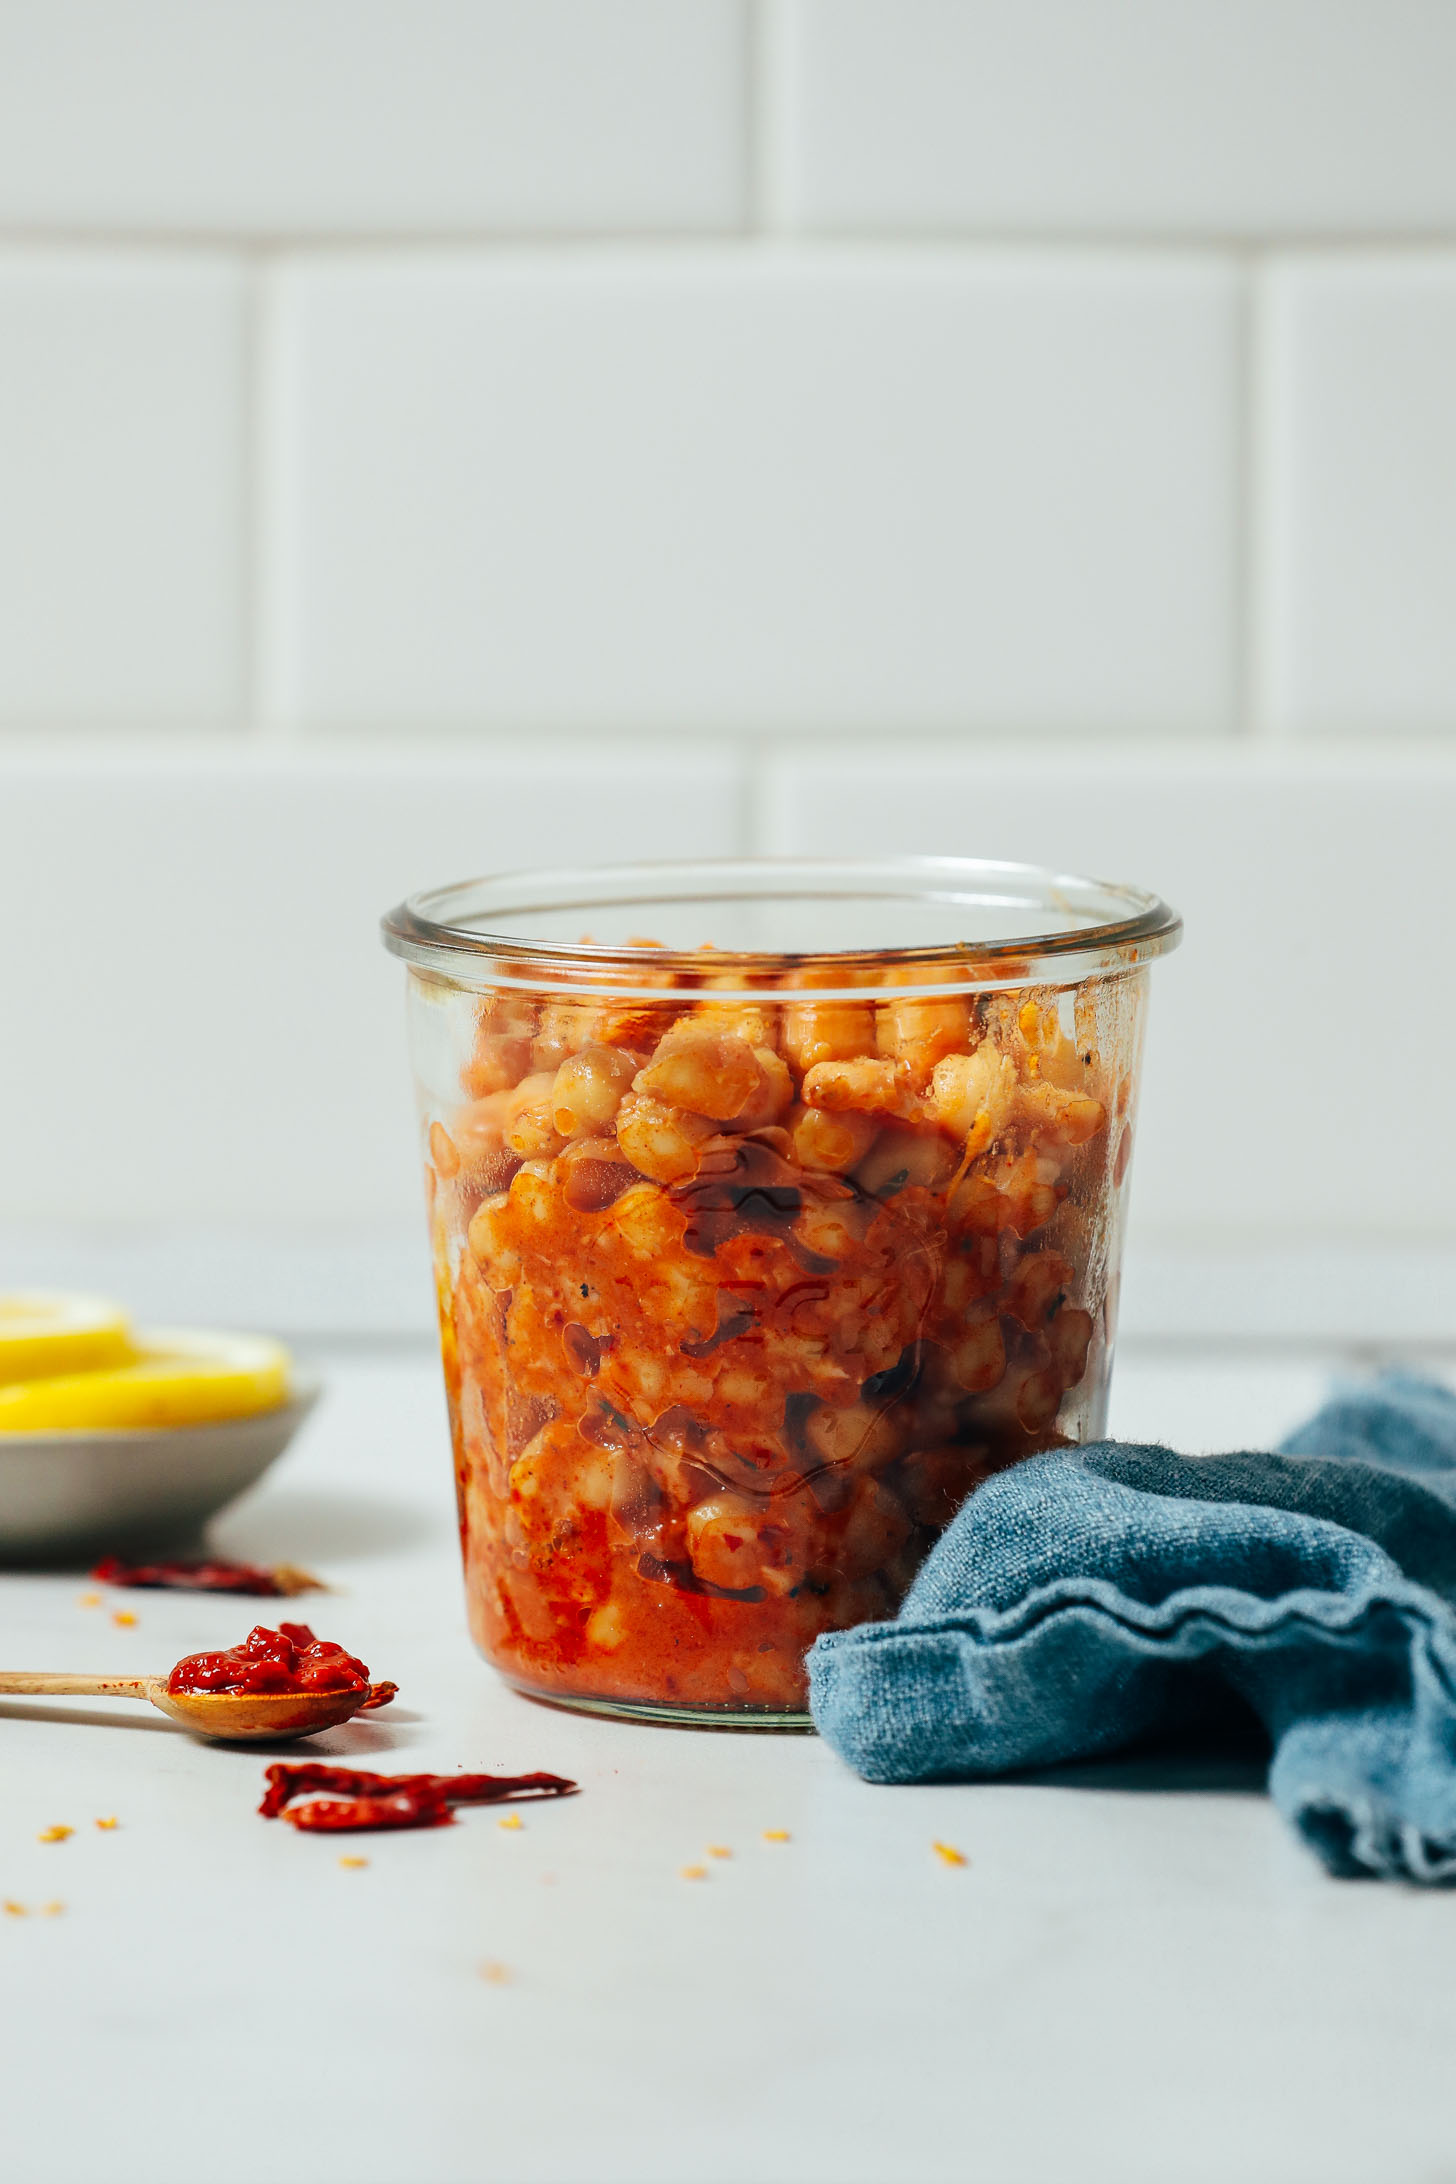 Spoonful of harissa paste next to a jar of Harissa Marinated Chickpeas